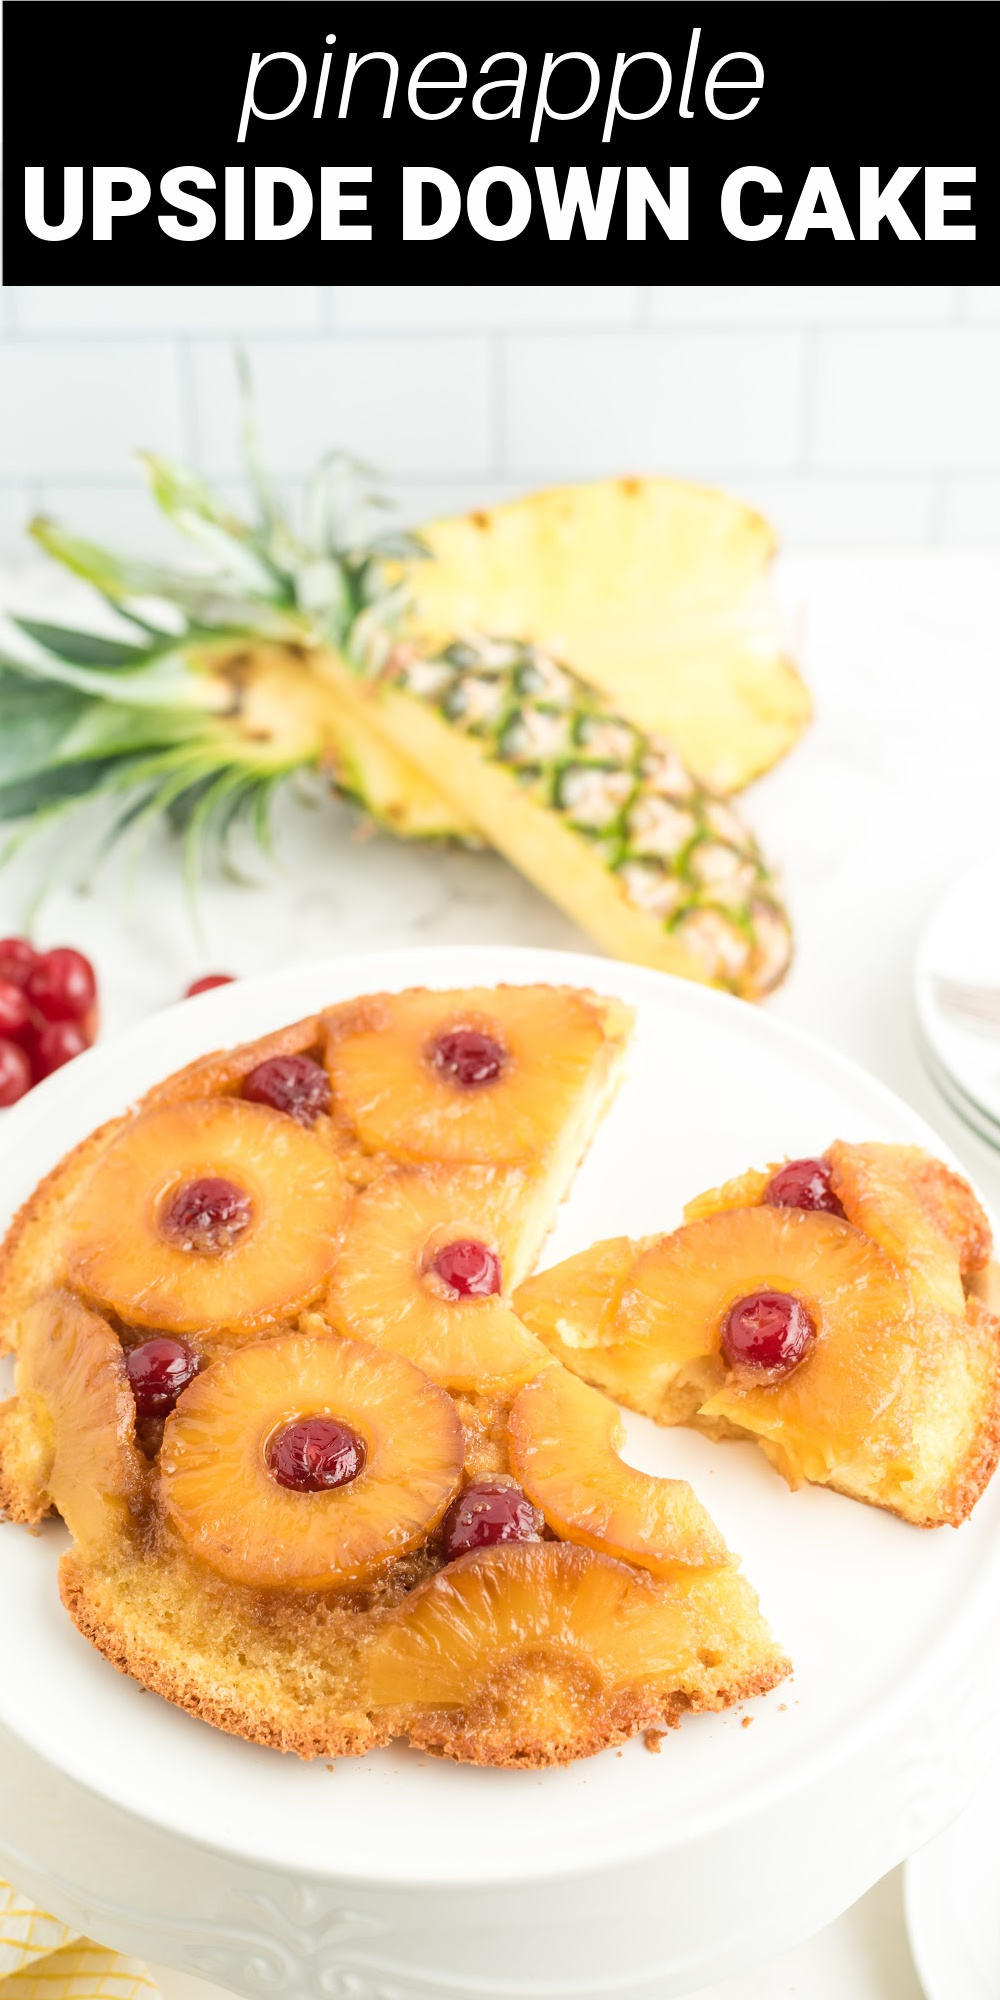 Pineapple Upside Down Cake is a buttery golden cake baked on top of a layer of caramelized brown sugar with the sweetness of pineapples and maraschino cherries. It's flipped over before serving to reveal the beautiful pineapple rings with bright red cherries in the middle.